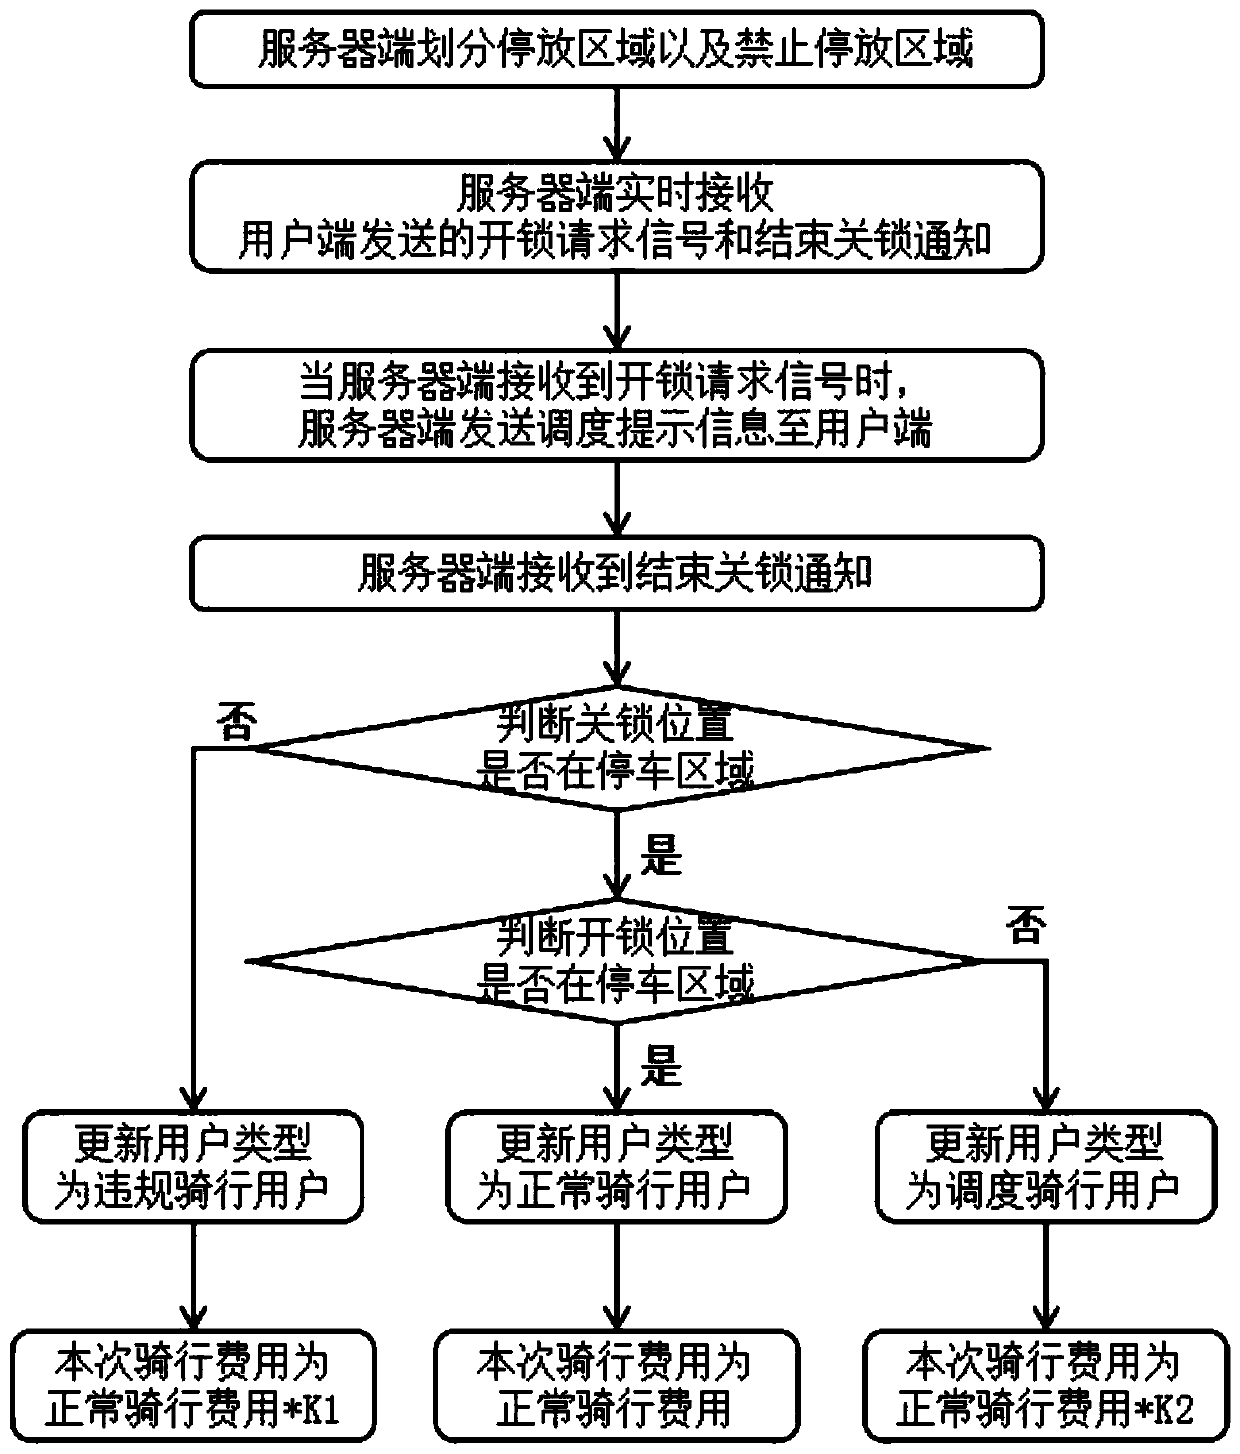 Shared electric bicycle scheduling method and scheduling system based on illegal parking